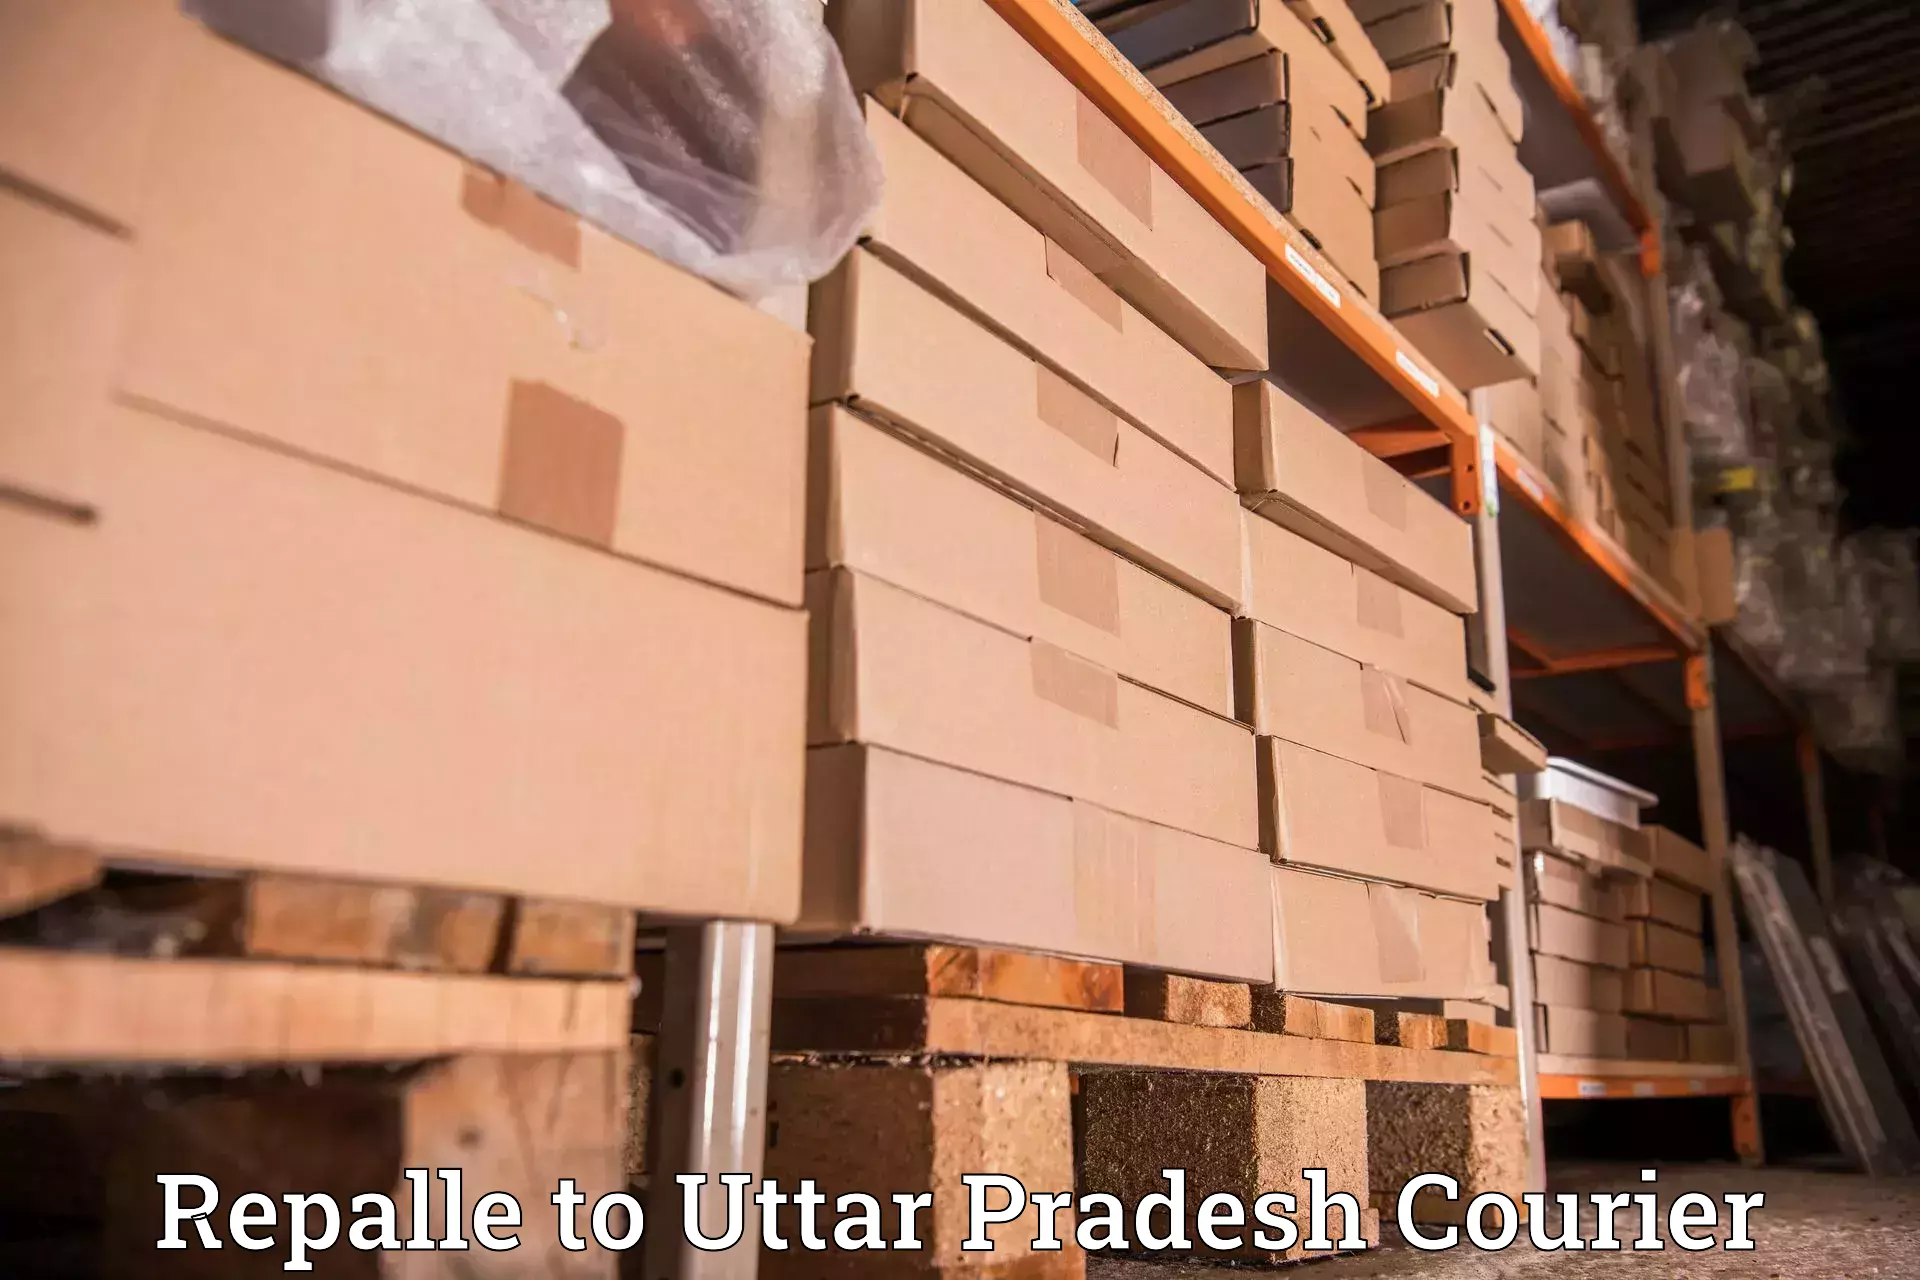 Large package courier Repalle to Firozabad